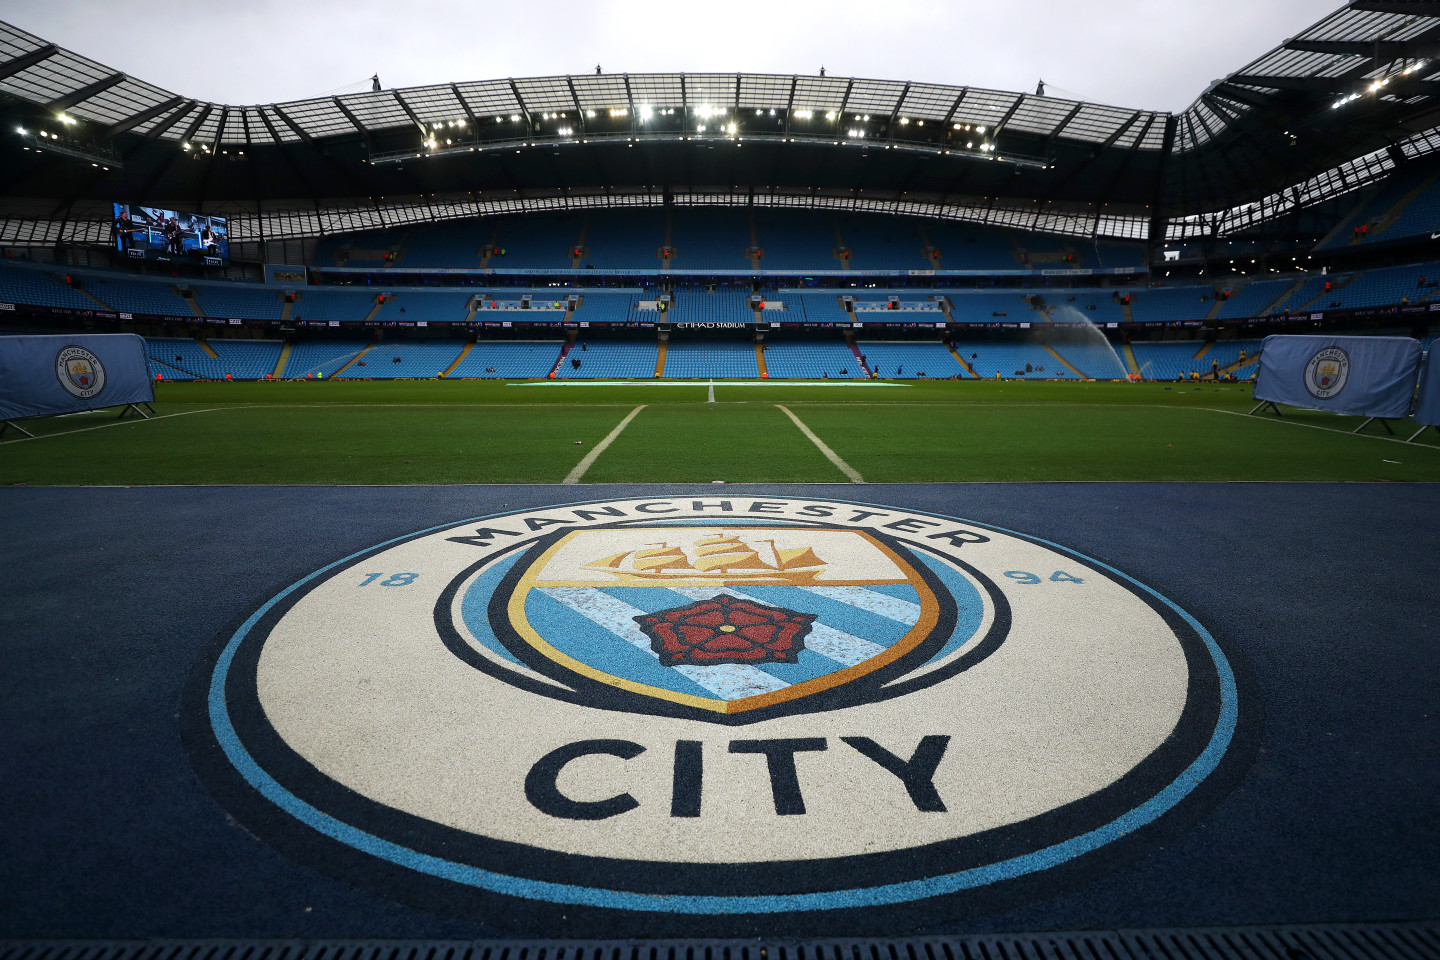 Download Manchester City Football Club rises above the rest